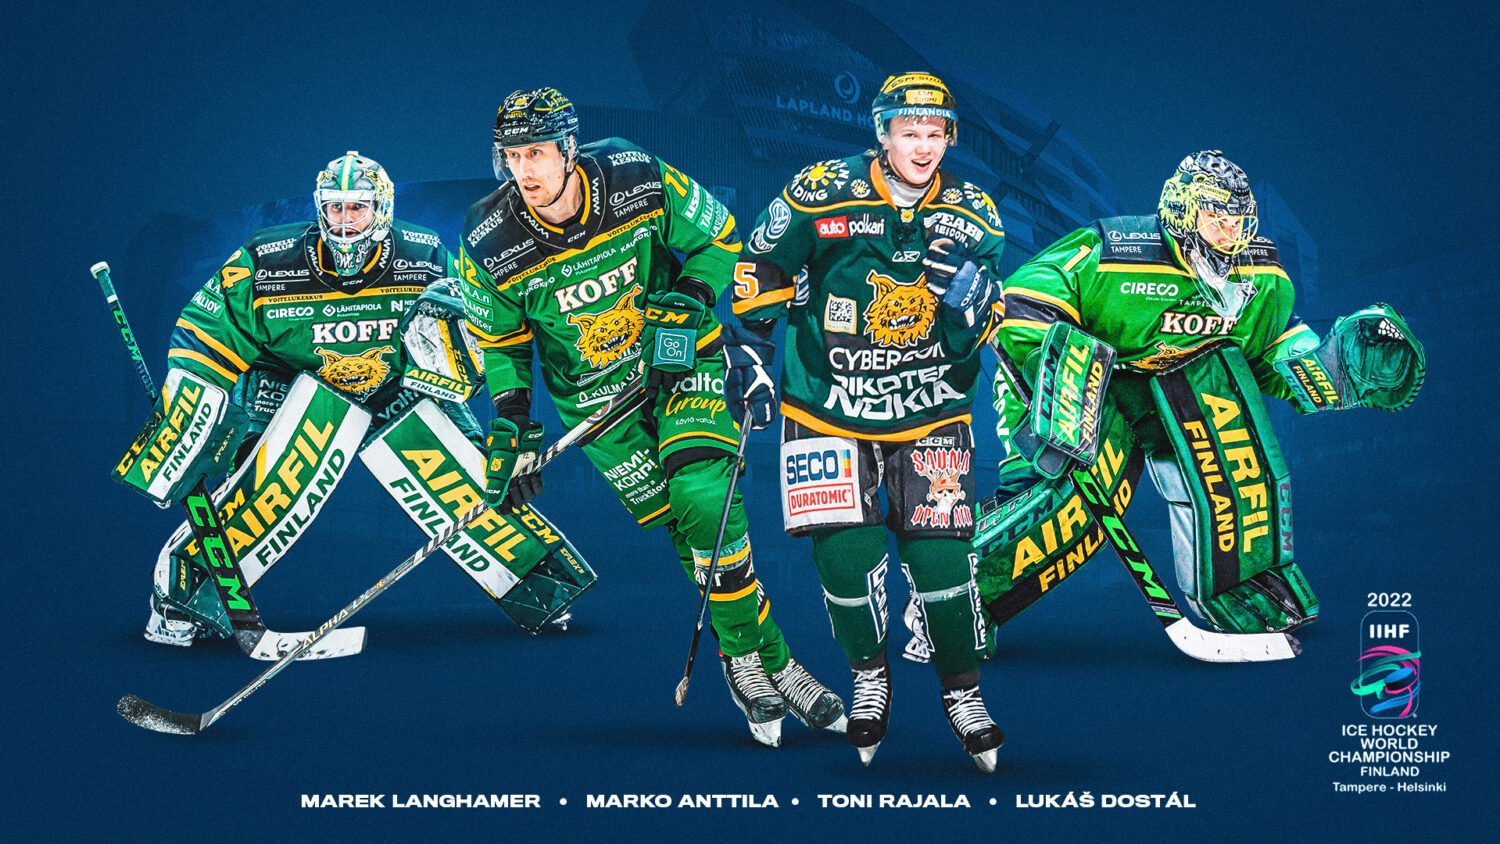 The 2022 IIHF Ice Hockey World Championship starts today – Anttila and Langhamer included in the final rosters